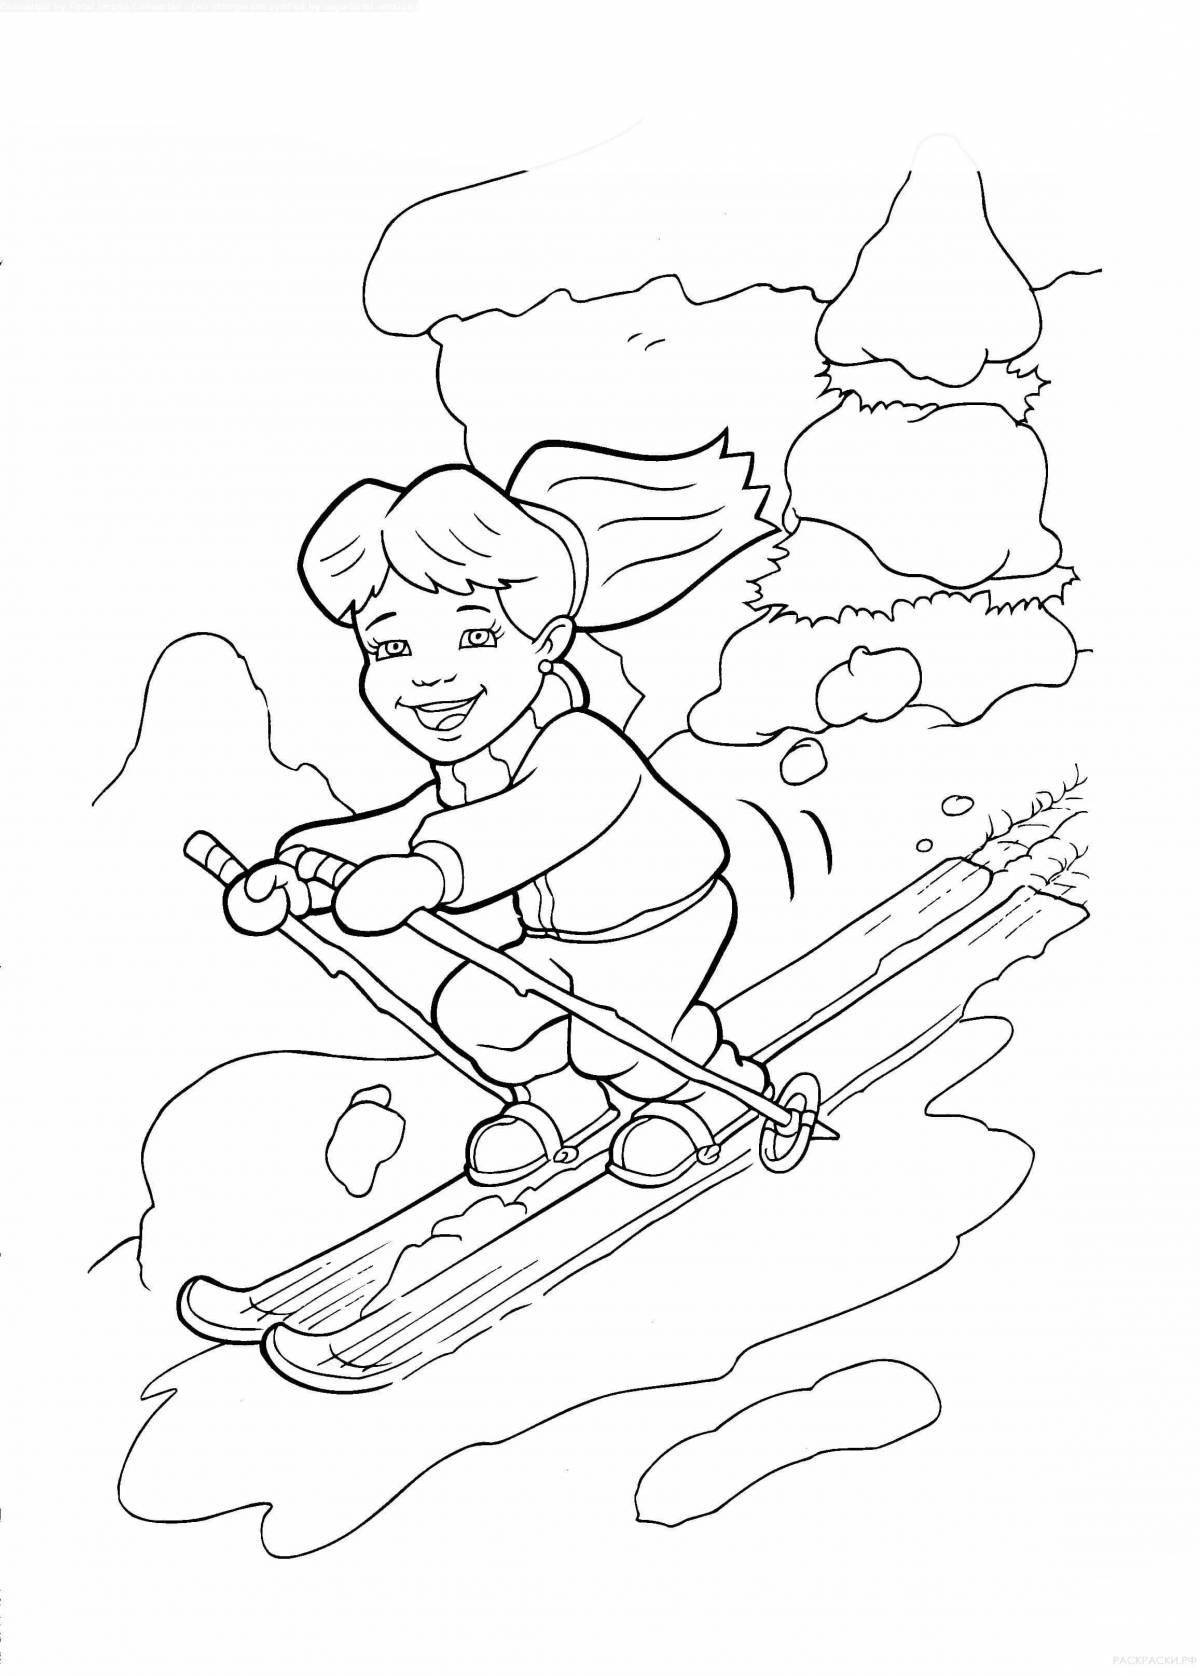 Coloring radiant family skiing